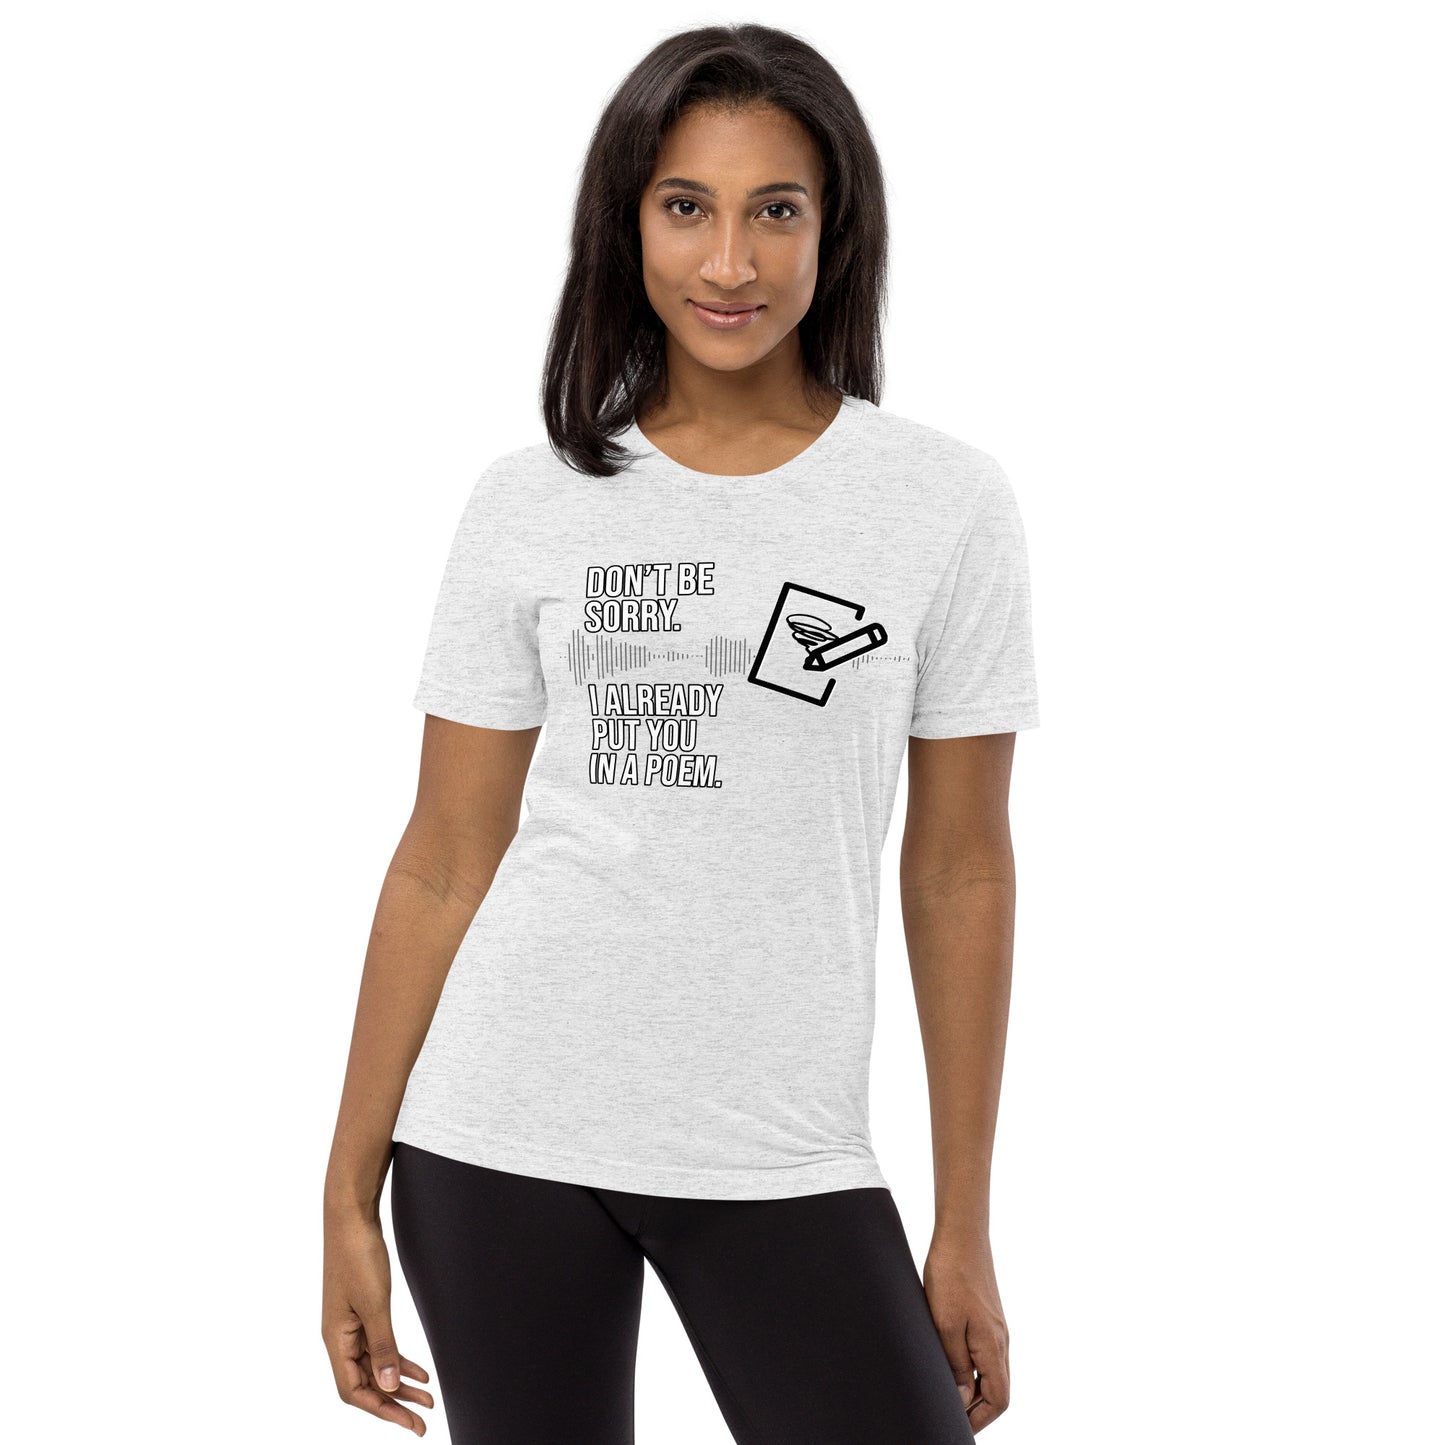 I Bet You Think This Poem Is About You - White font Short Sleeve Tri-Blend Shirt